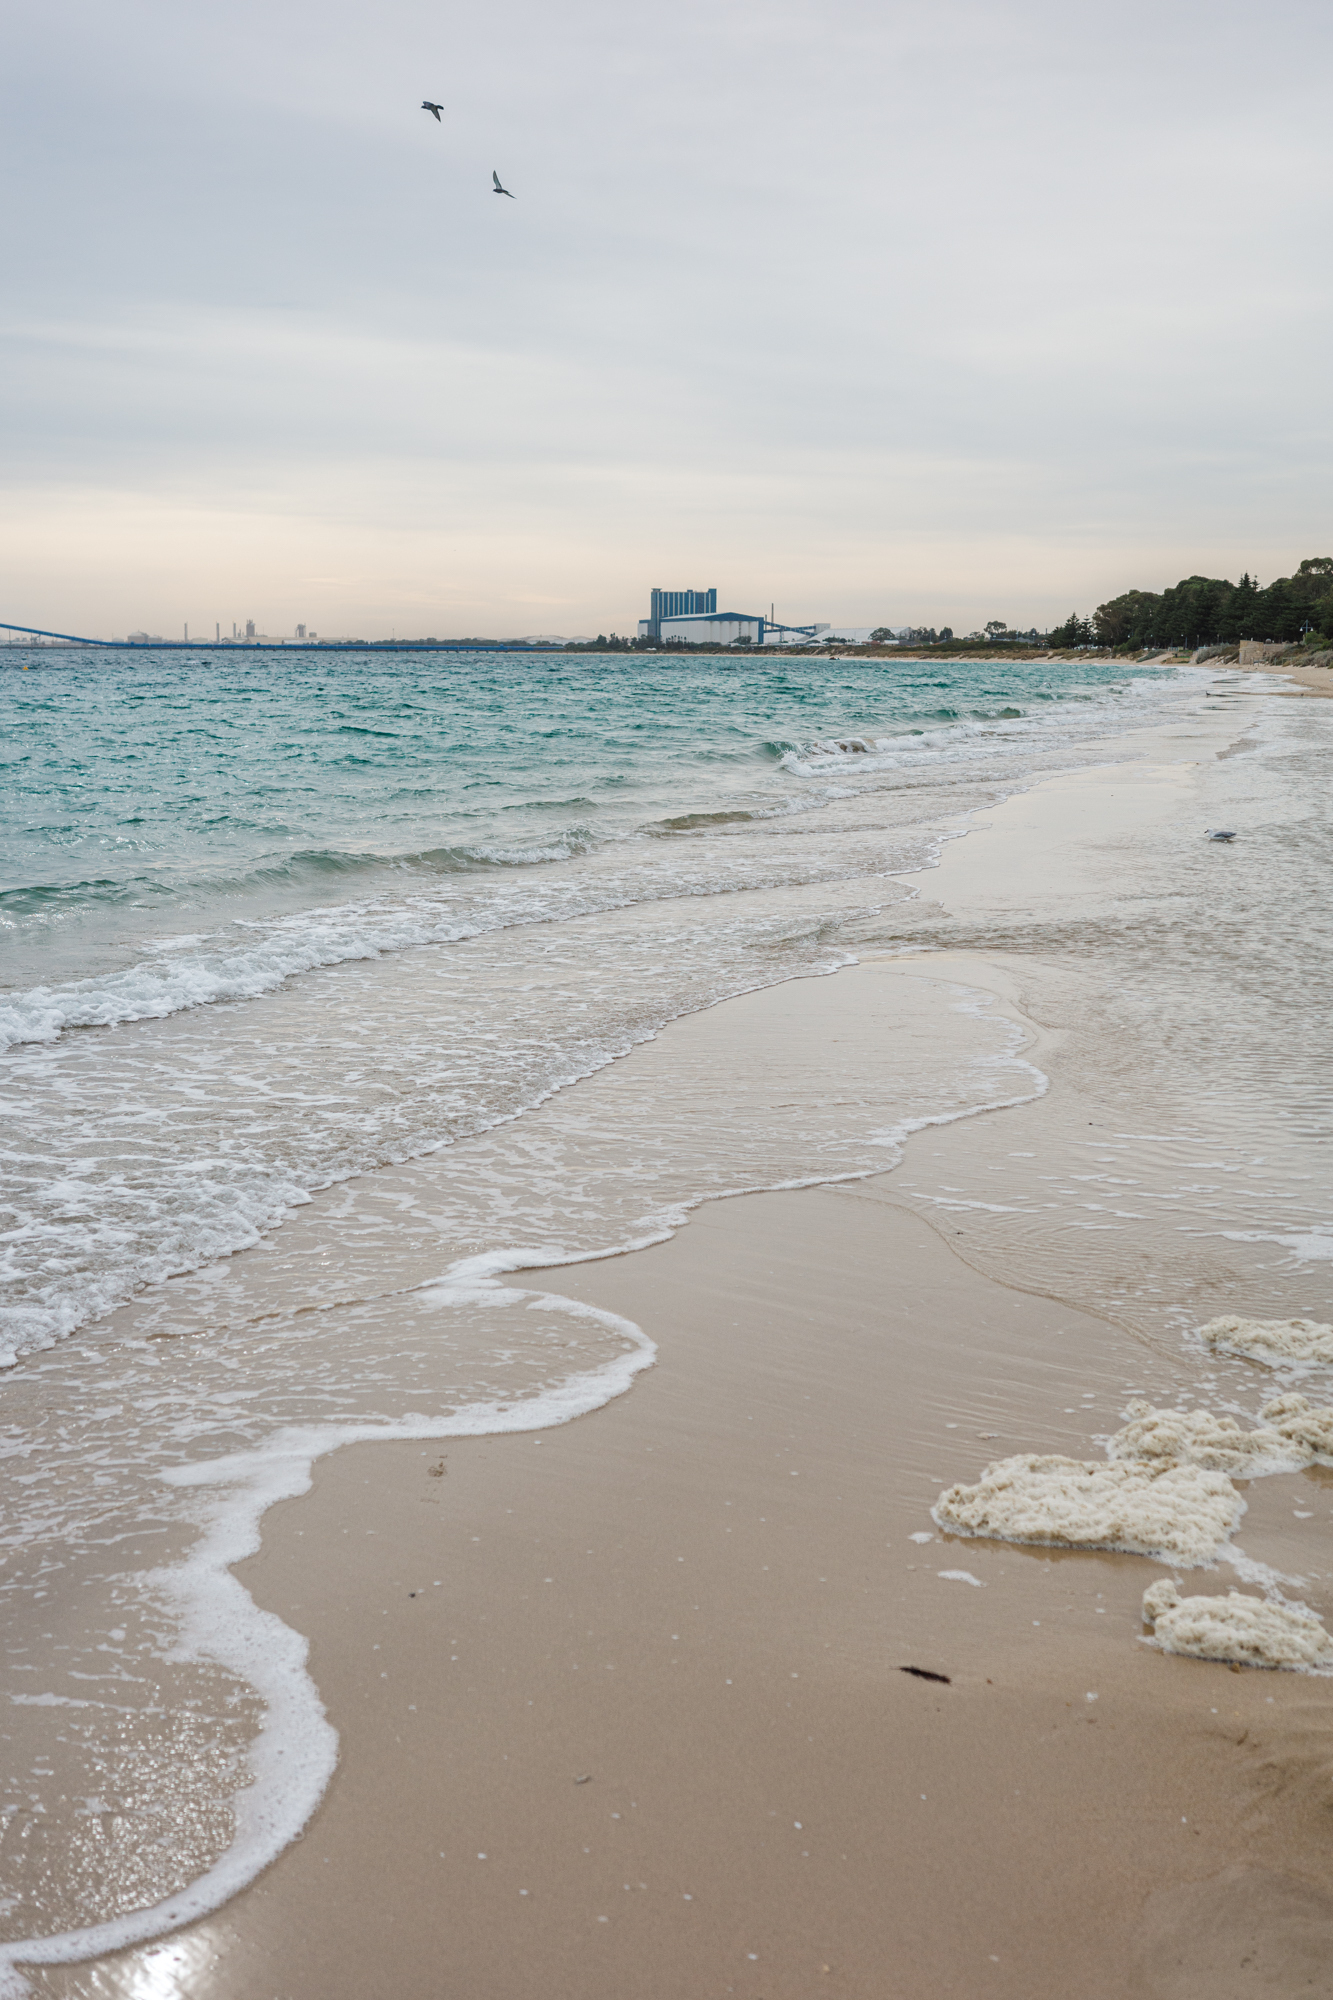 Auto-generated description: A serene beach scene with gentle waves lapping the shore, a cloudy sky above, and a distant building on the horizon.